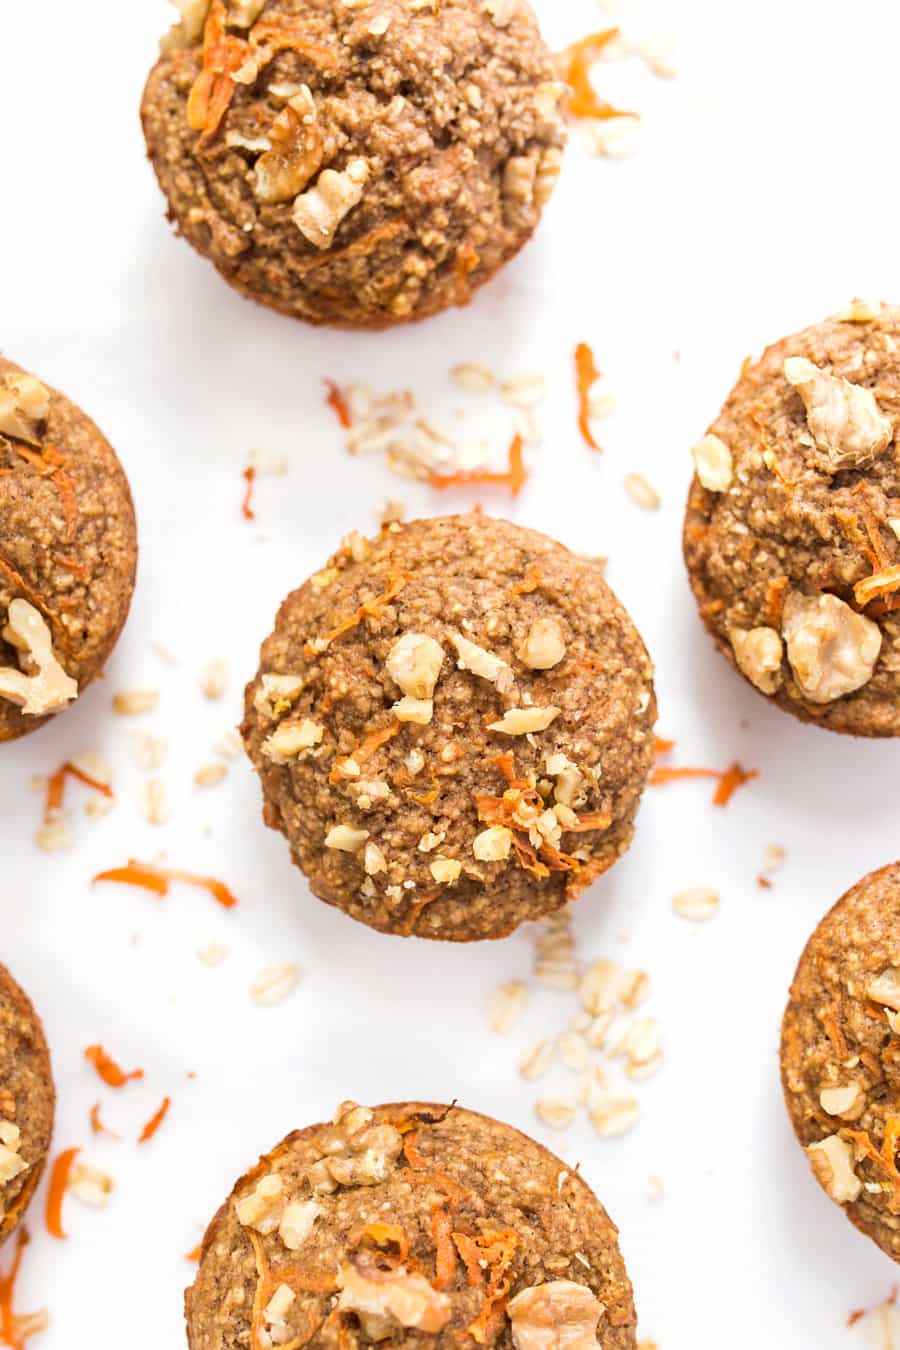 These HEALTHY Carrot Cake Blender Muffins are a great way to sneak in some extra fruit to your breakfast! [naturally GF too]